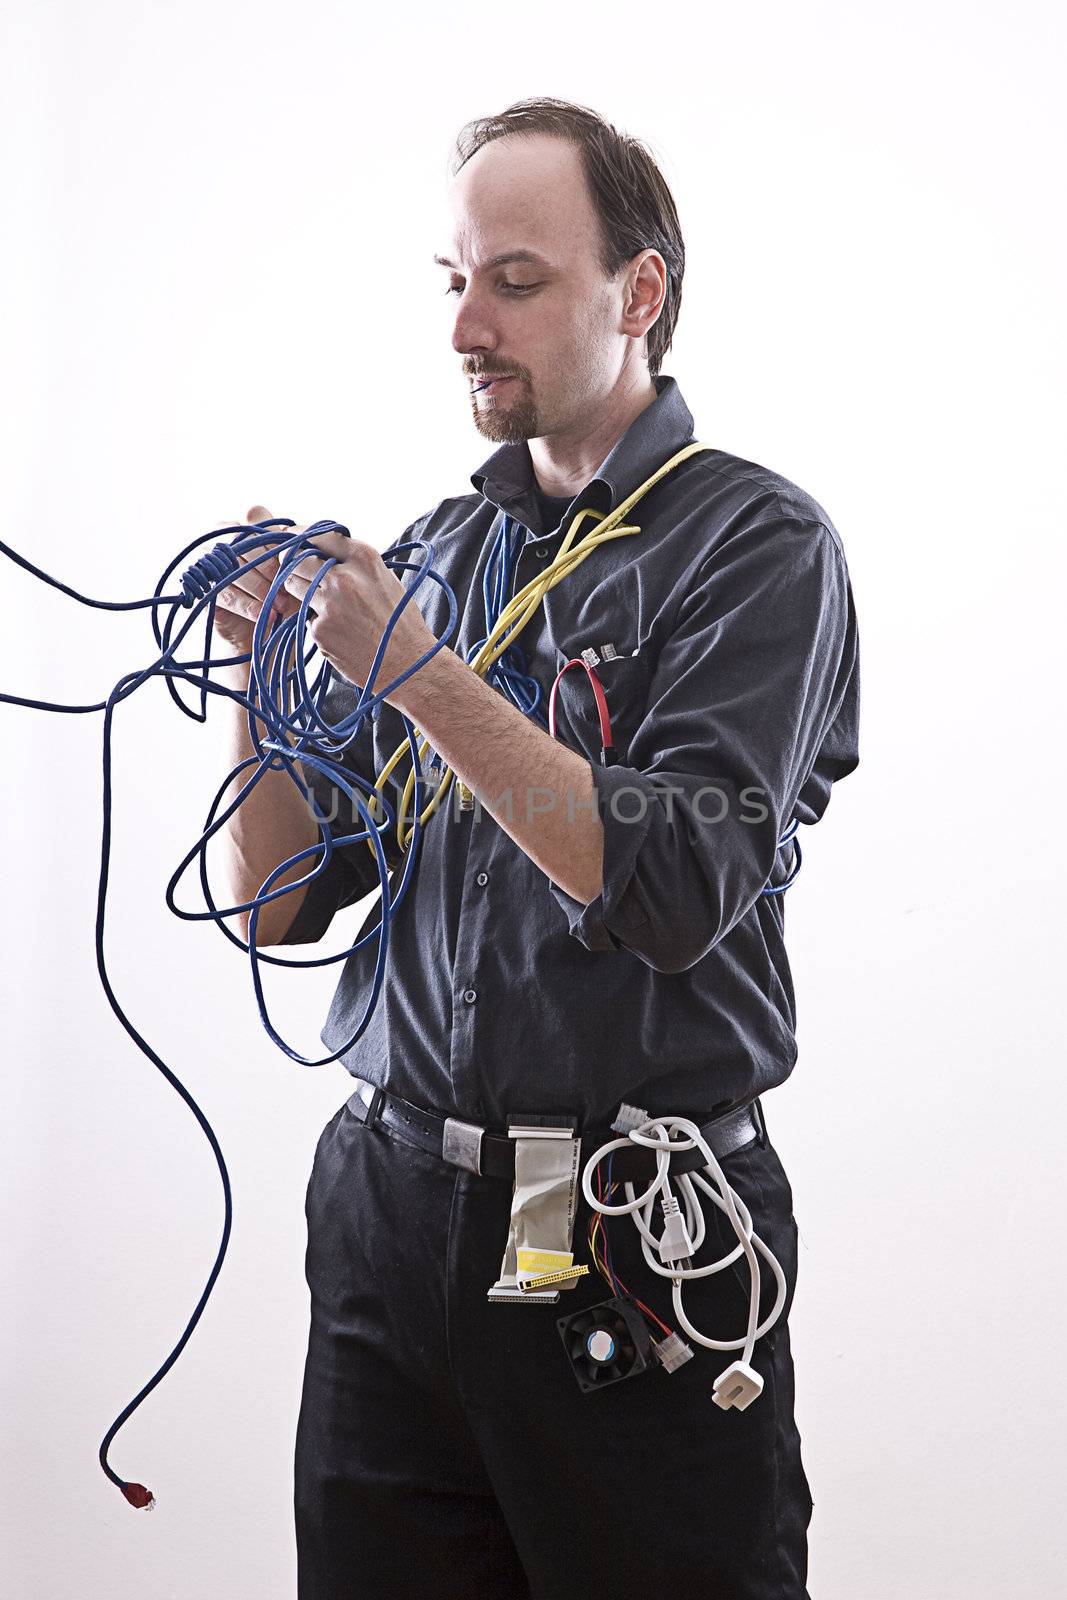 technician taking a bite out of some blue network cable